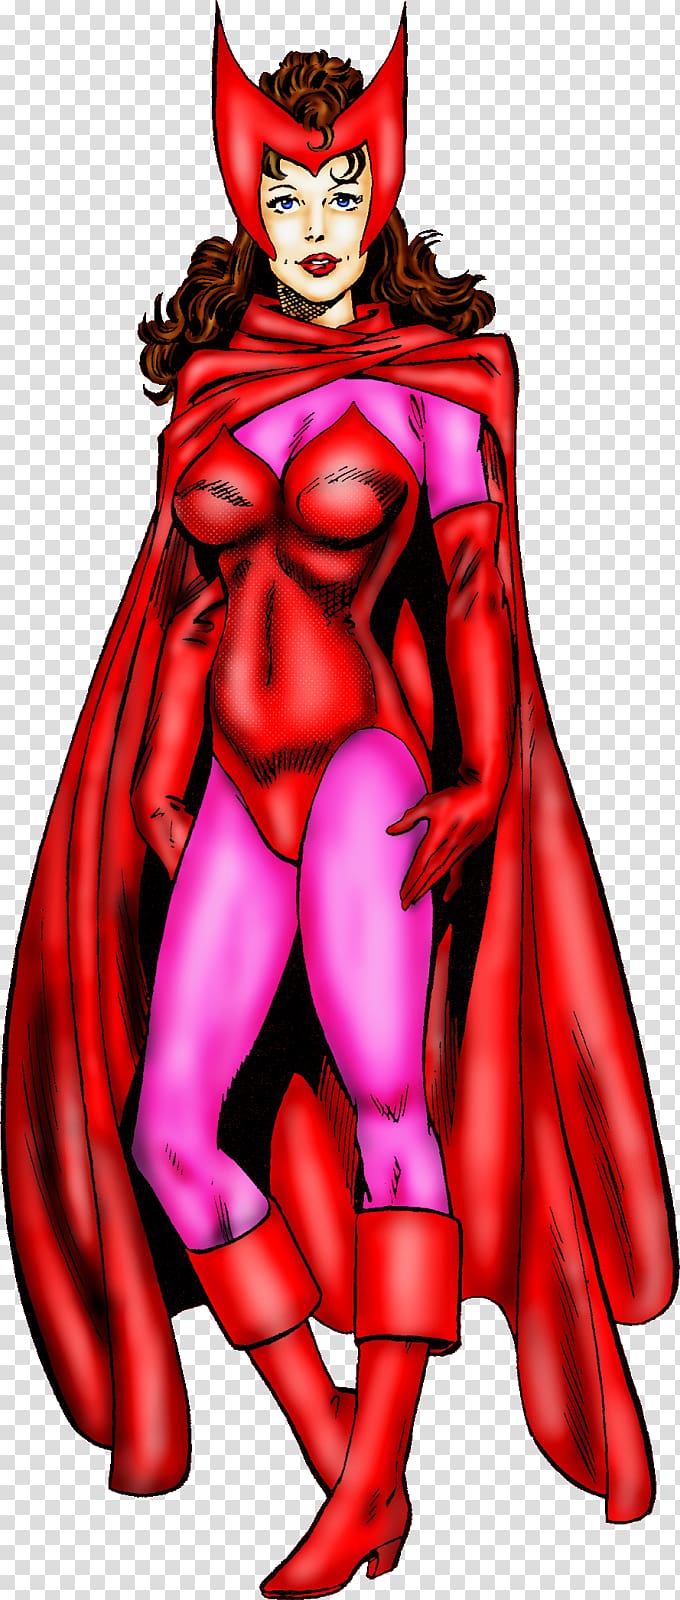 Wanda Maximoff Wasp Magneto Quicksilver Iron Man, Scarlet Witch transparent background PNG clipart